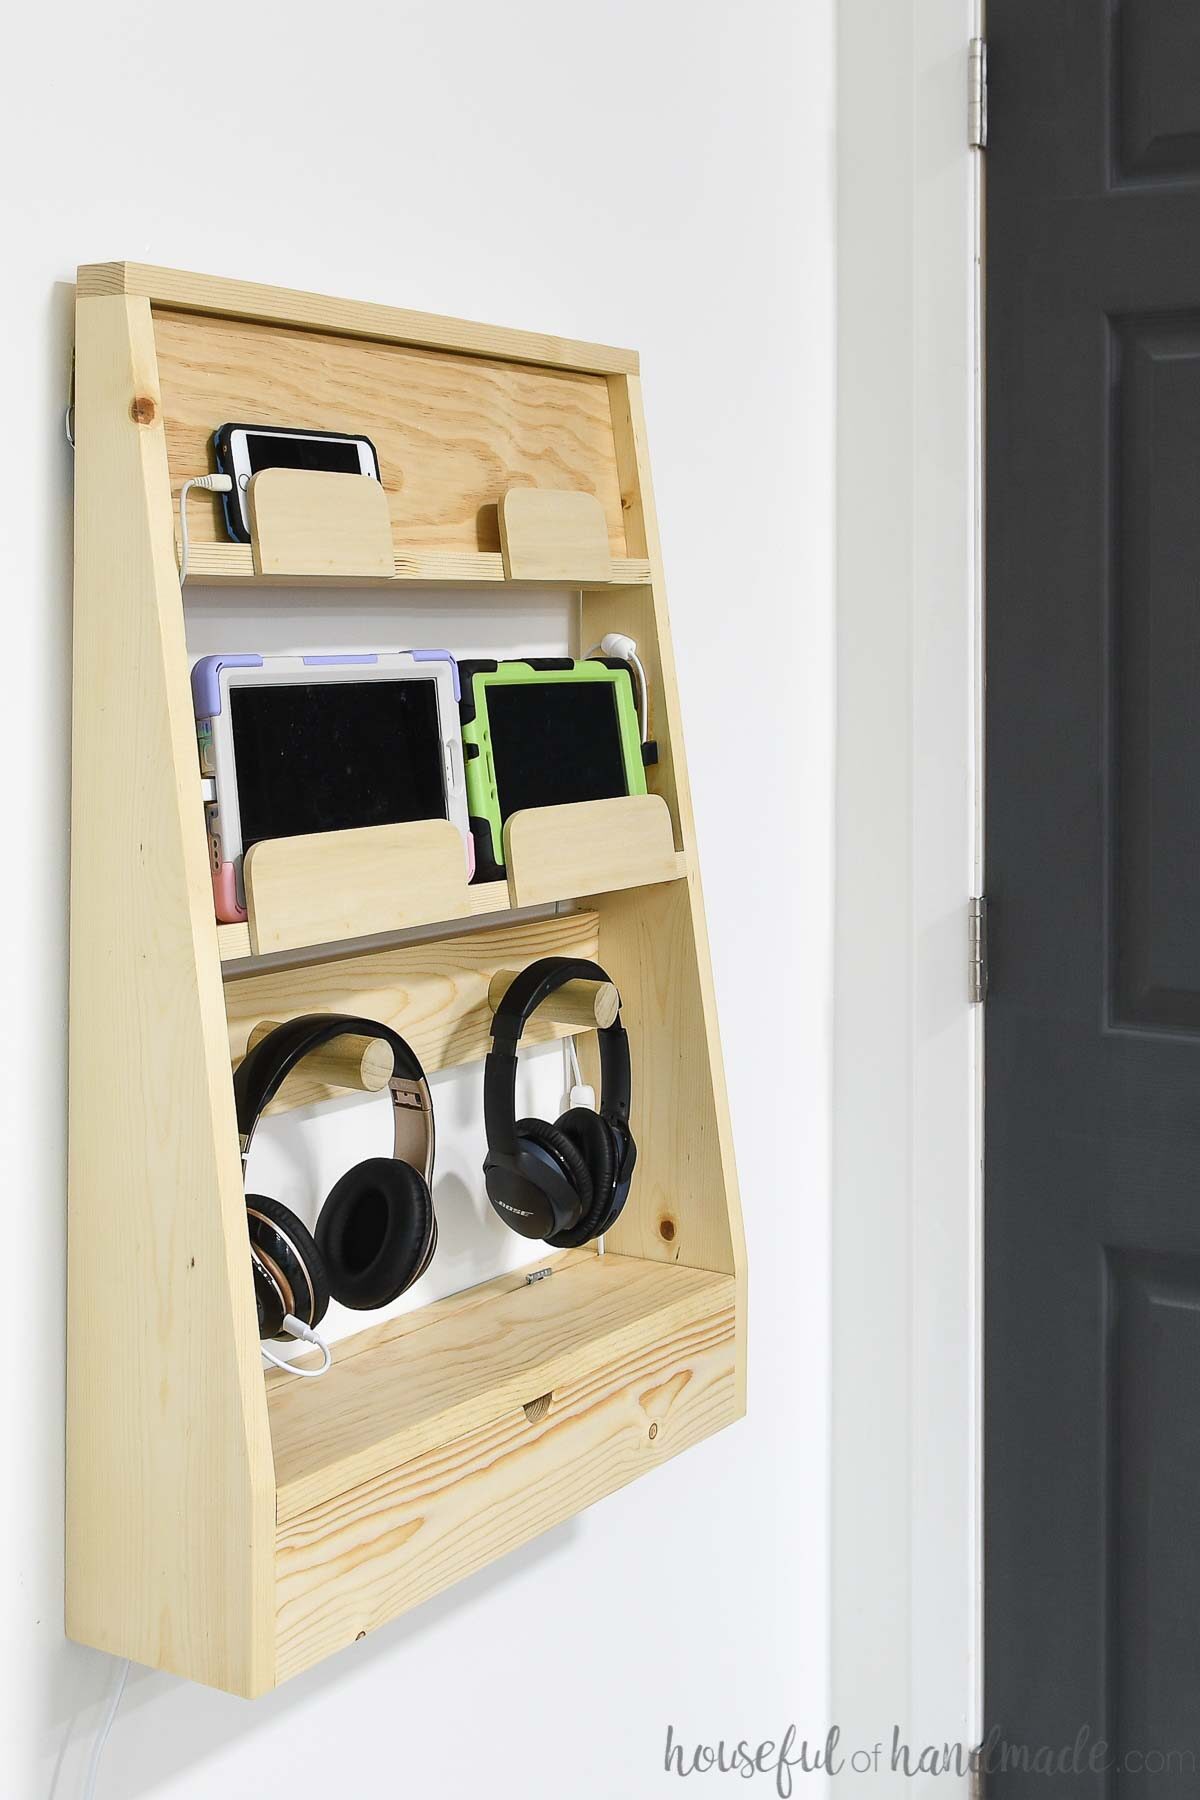 Side view of the wall mounted charging station for phones and tablets. 